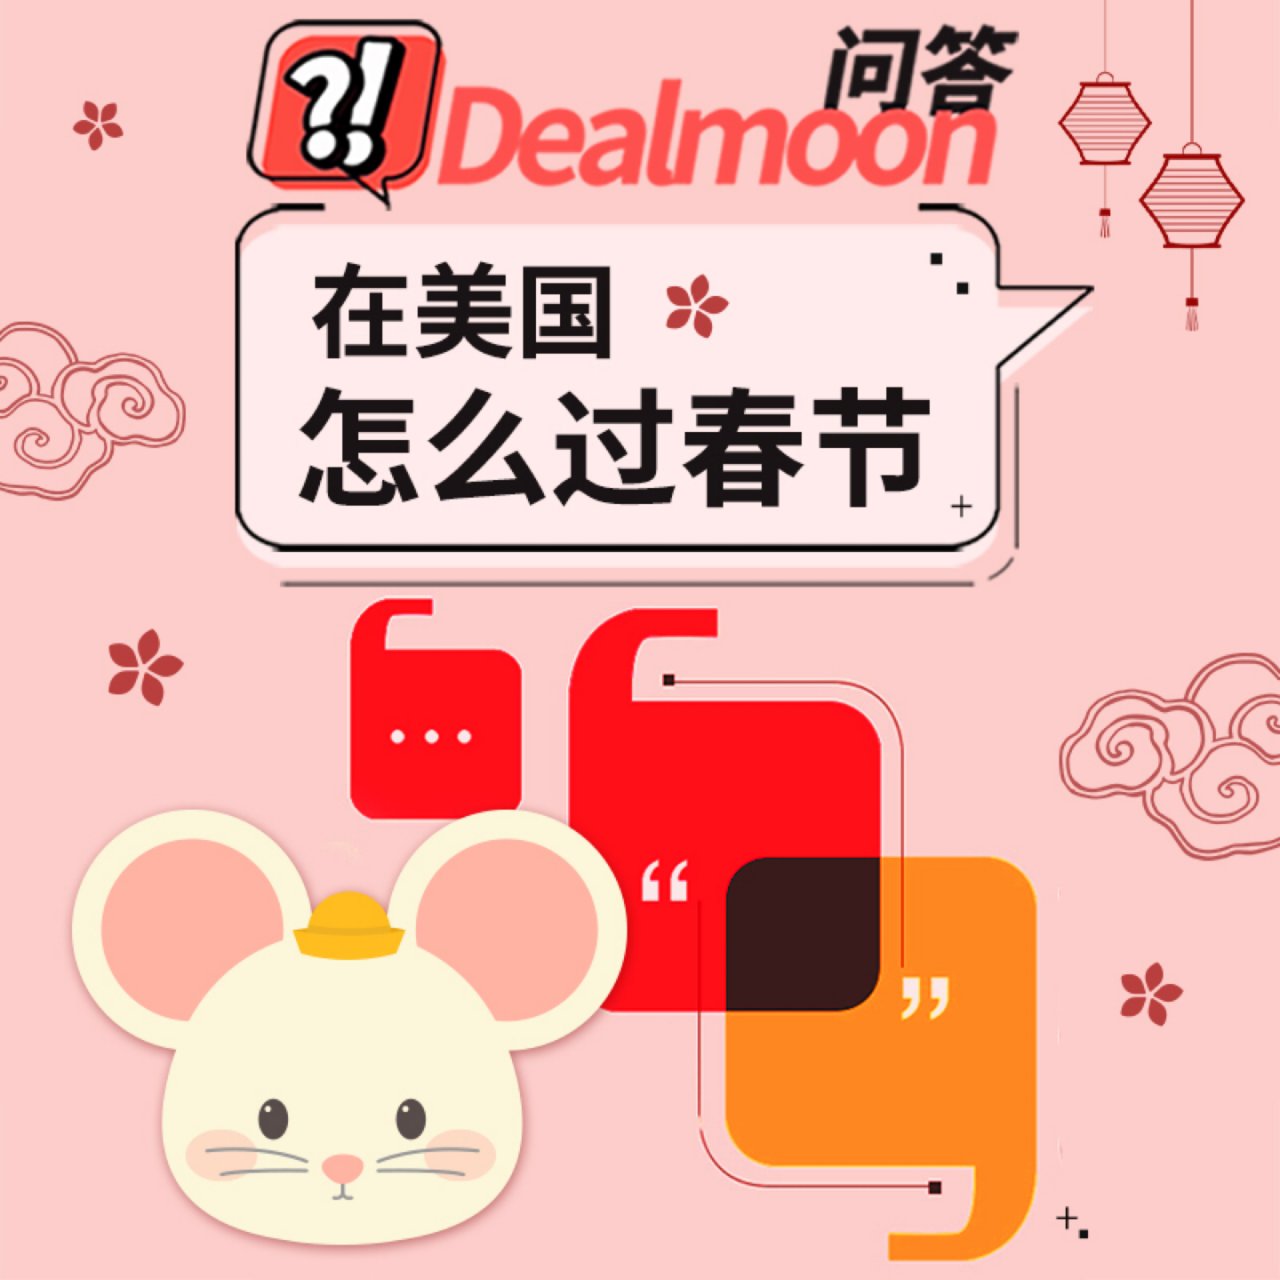 Dealmoon问答第8期：来聊聊在美国...